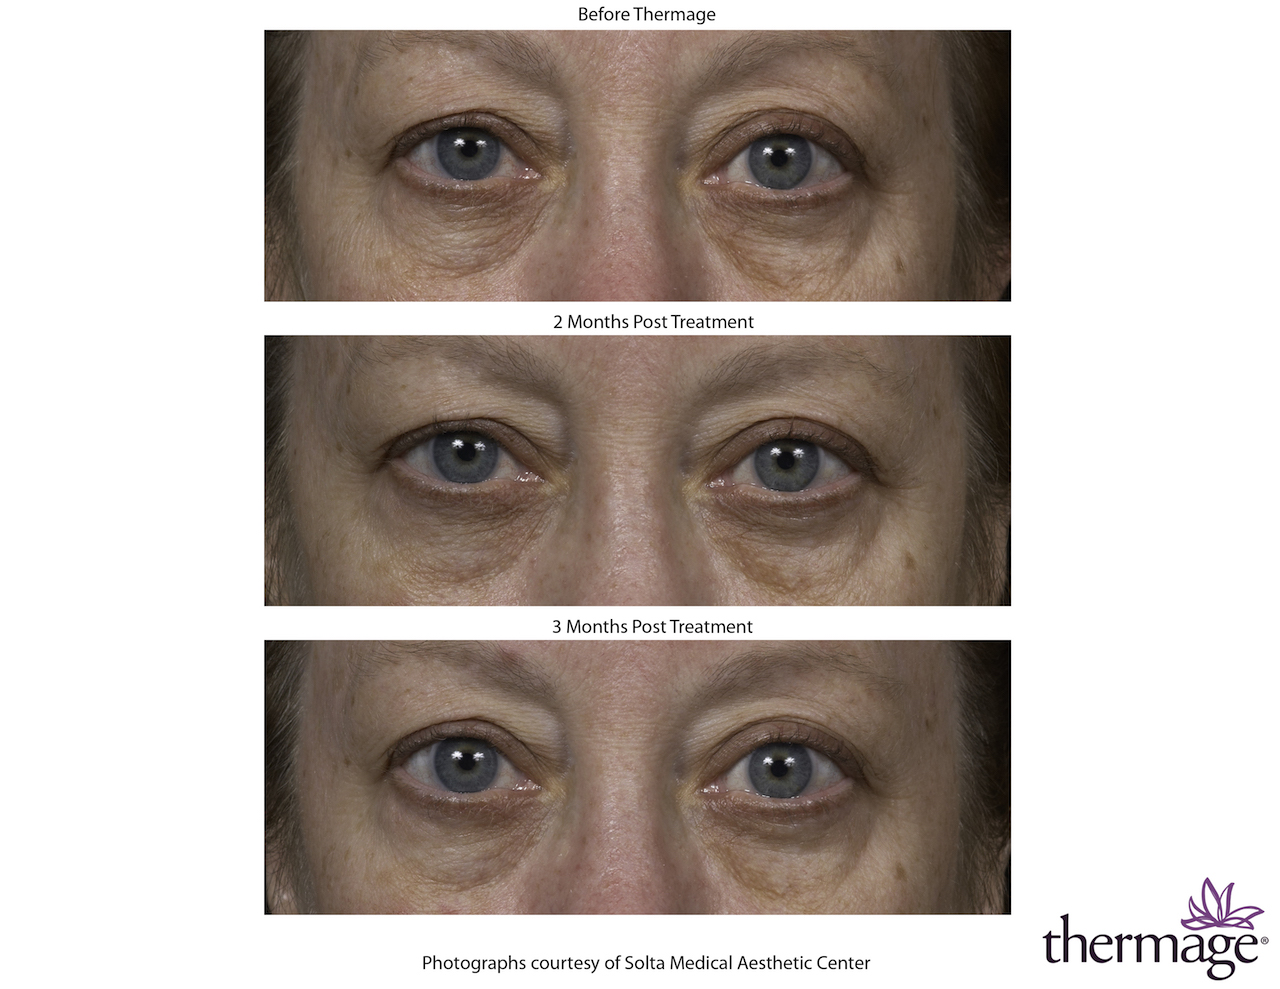 thermage treatment before and after